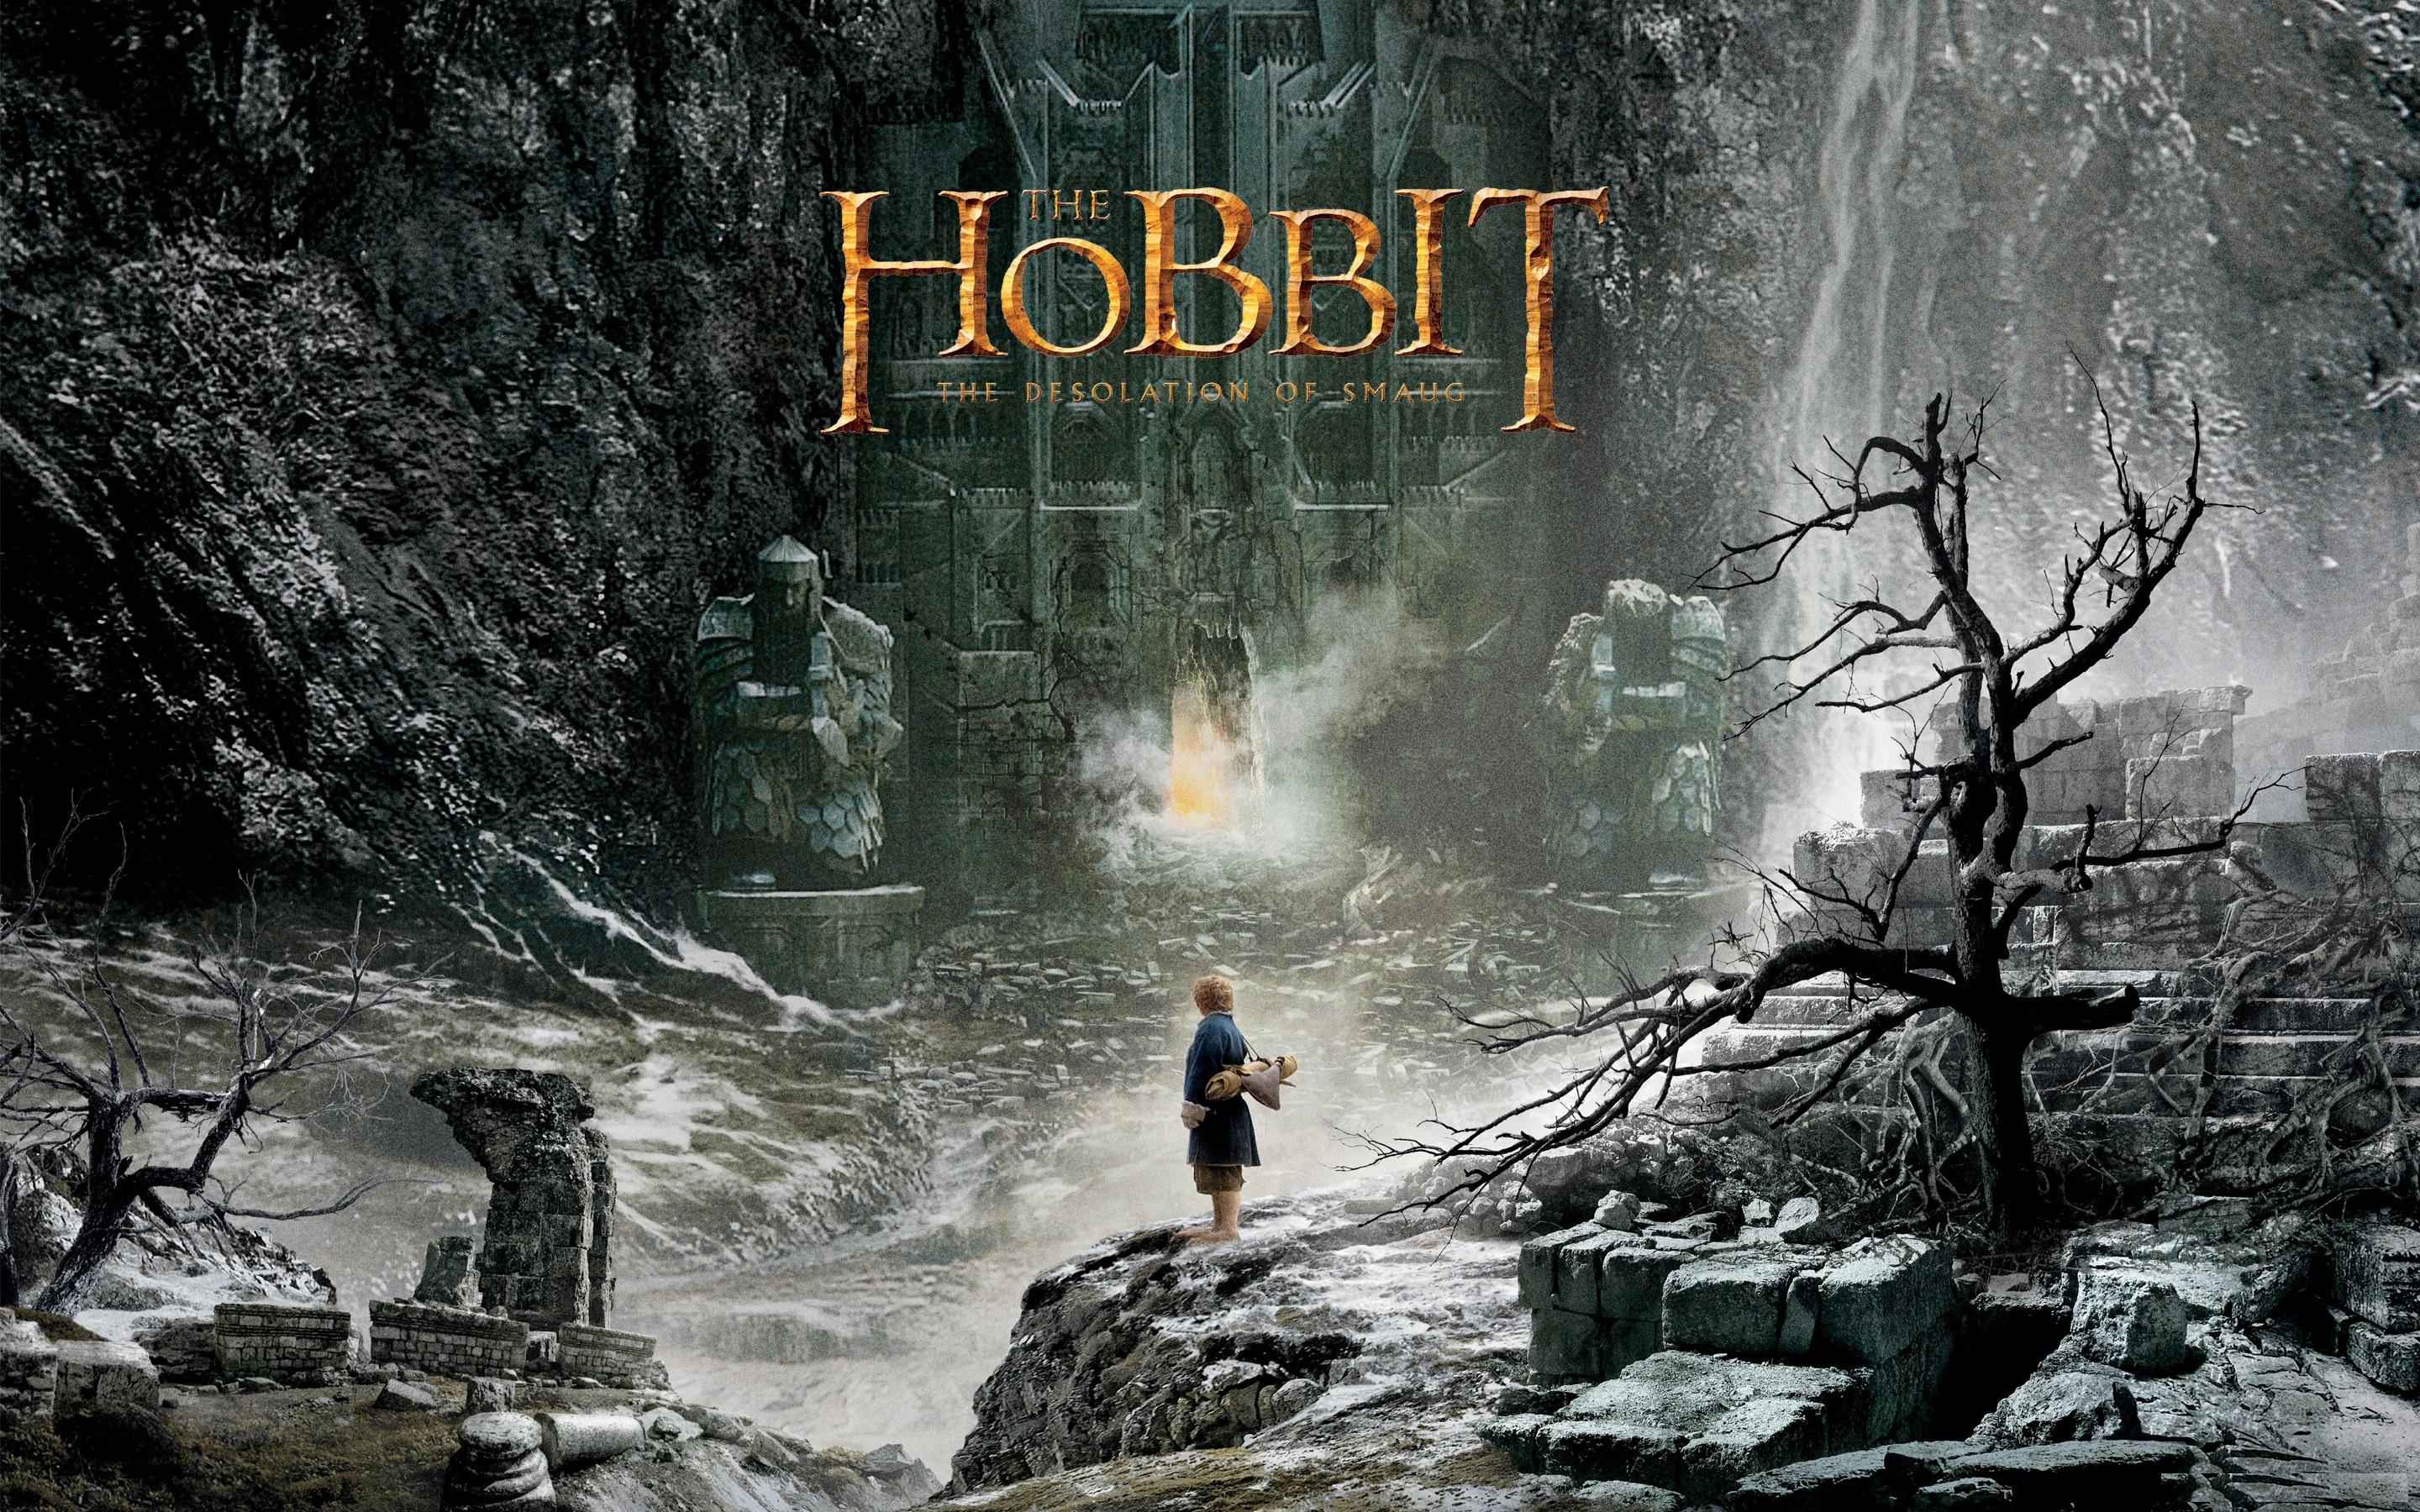 The hobbit the desolation of smaug high definition wallpapers